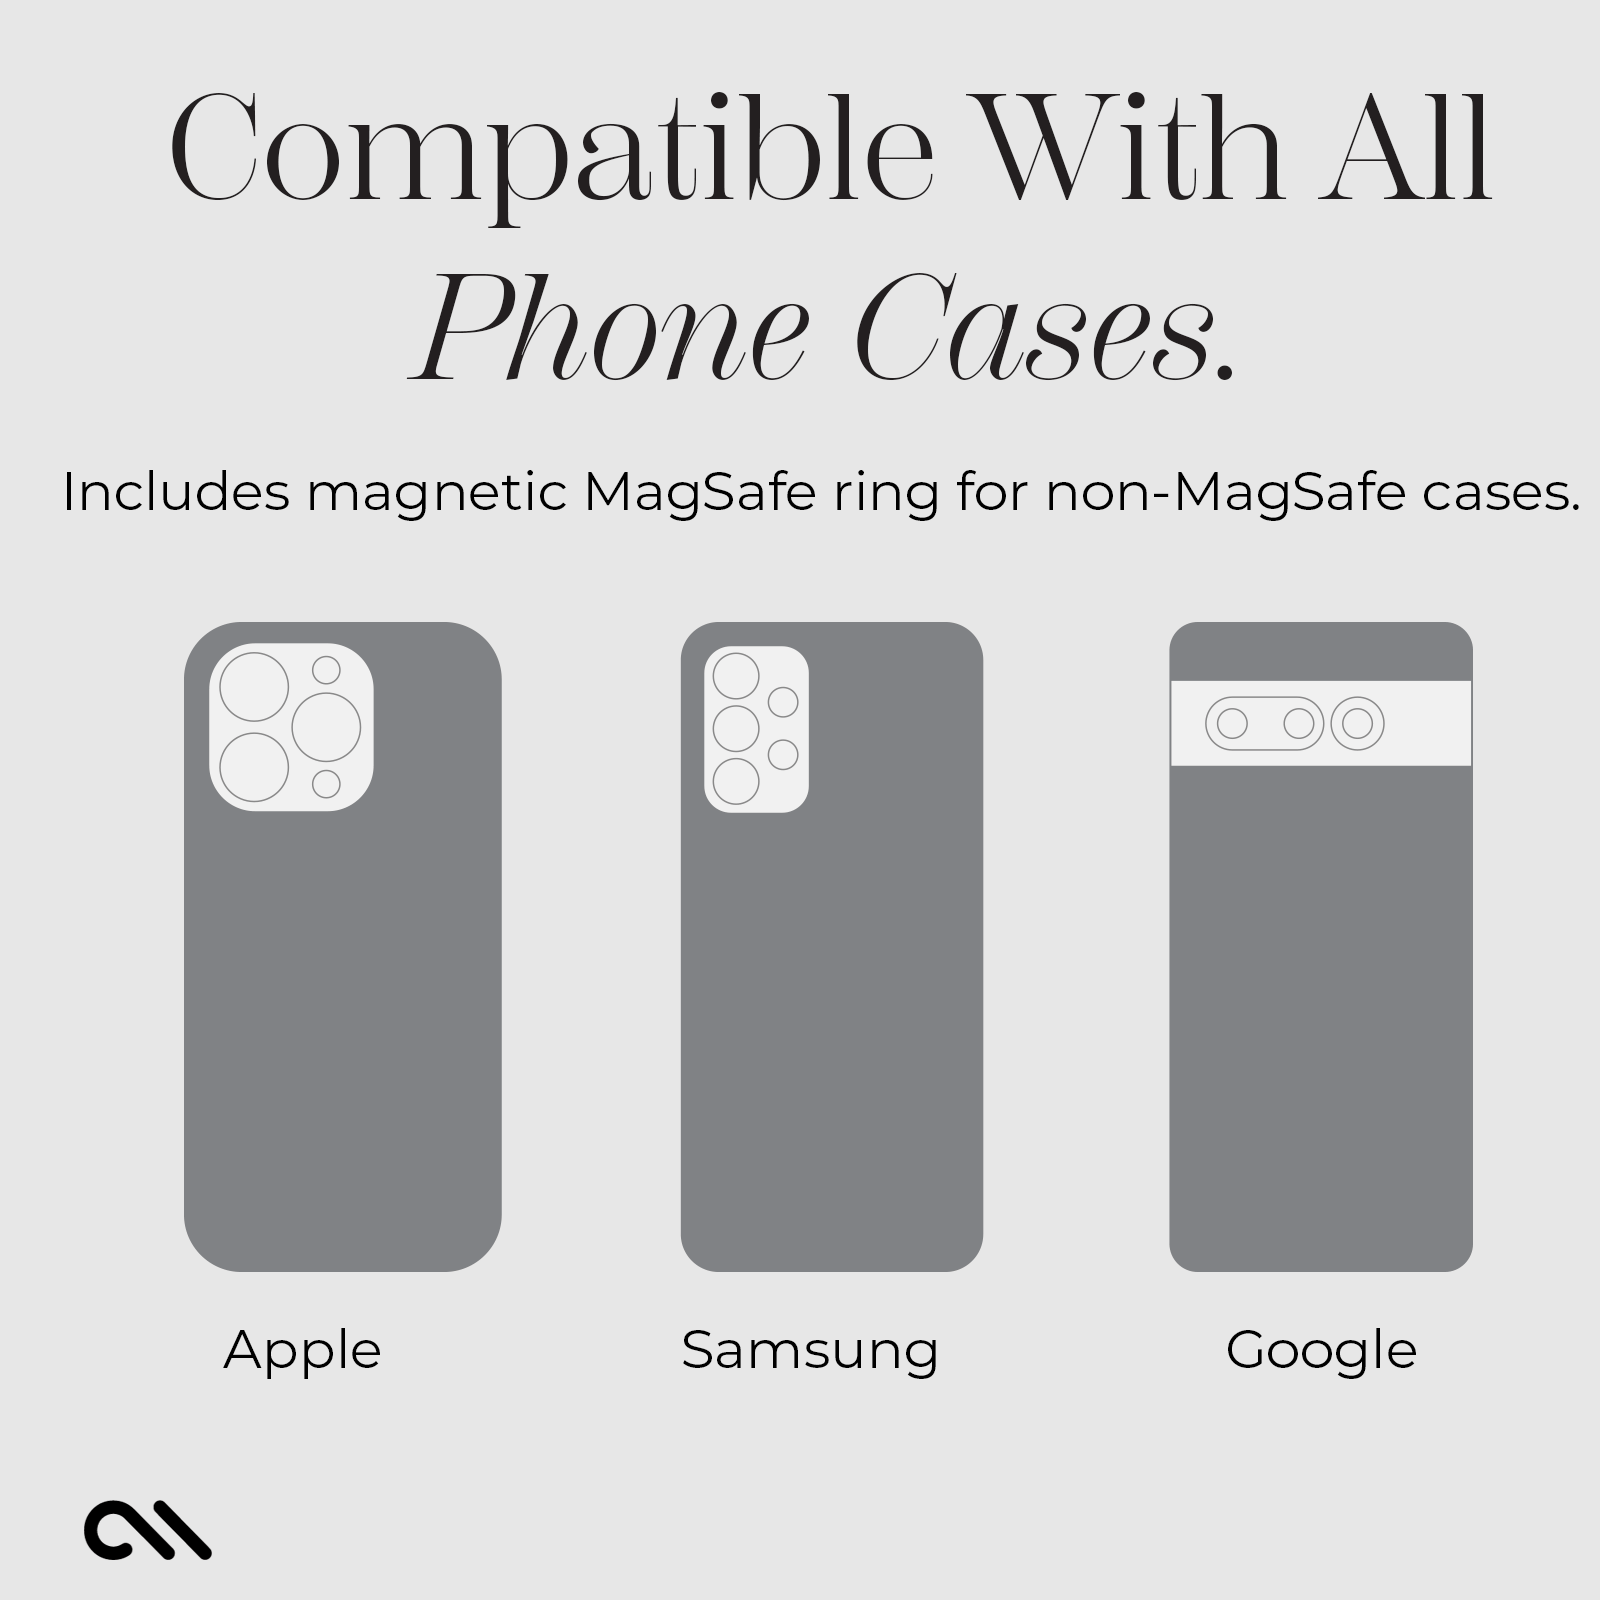 COMPATIBLE WITH ALL PHONE CASES. INCLUDES MAGNETIC MAGSAFE RING FOR NON-MAGSAFE CASES